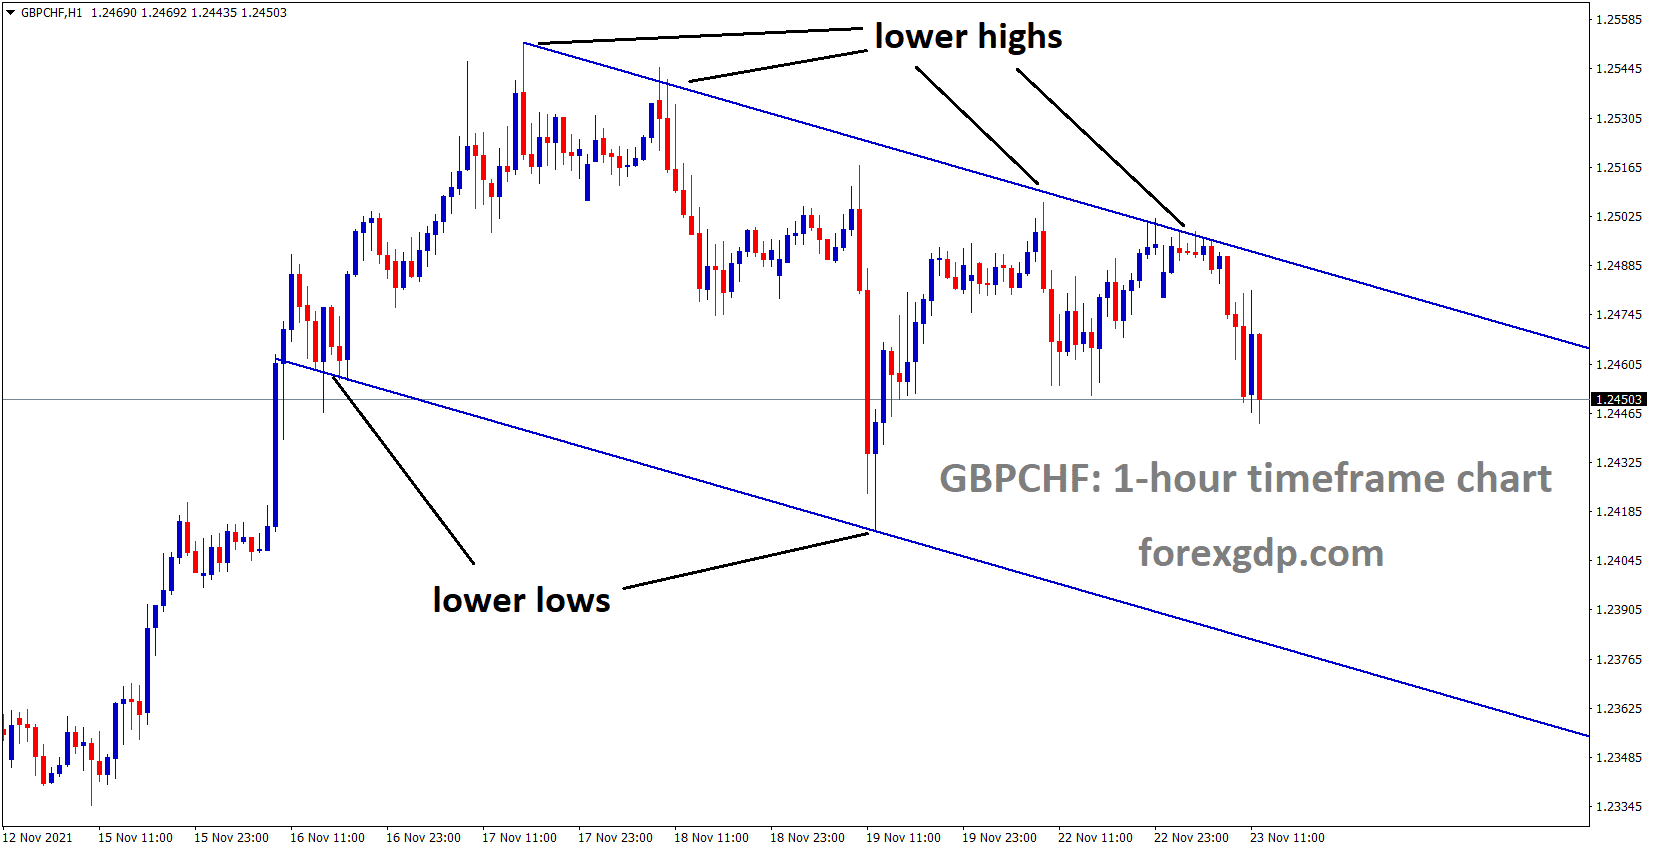 GBPCHF is moving in the Descending channel and the market fell from the Lower high area